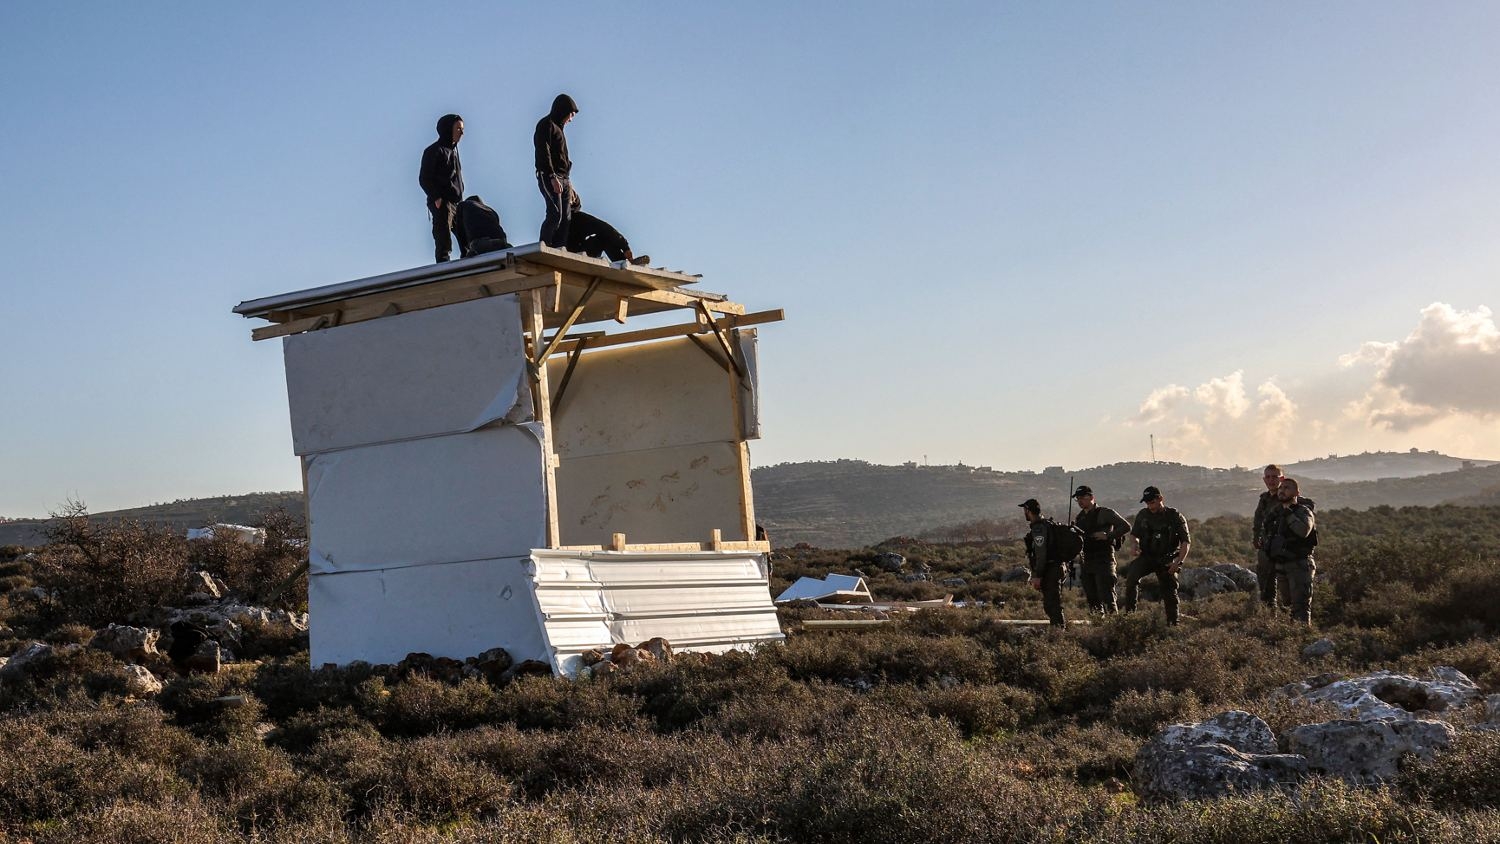 Israeli border guards arrive to evacuate settlers who attempted to reestablish an illegal settlement outpost called Or Haim in the  occupied West Bank on 22 January 2023.